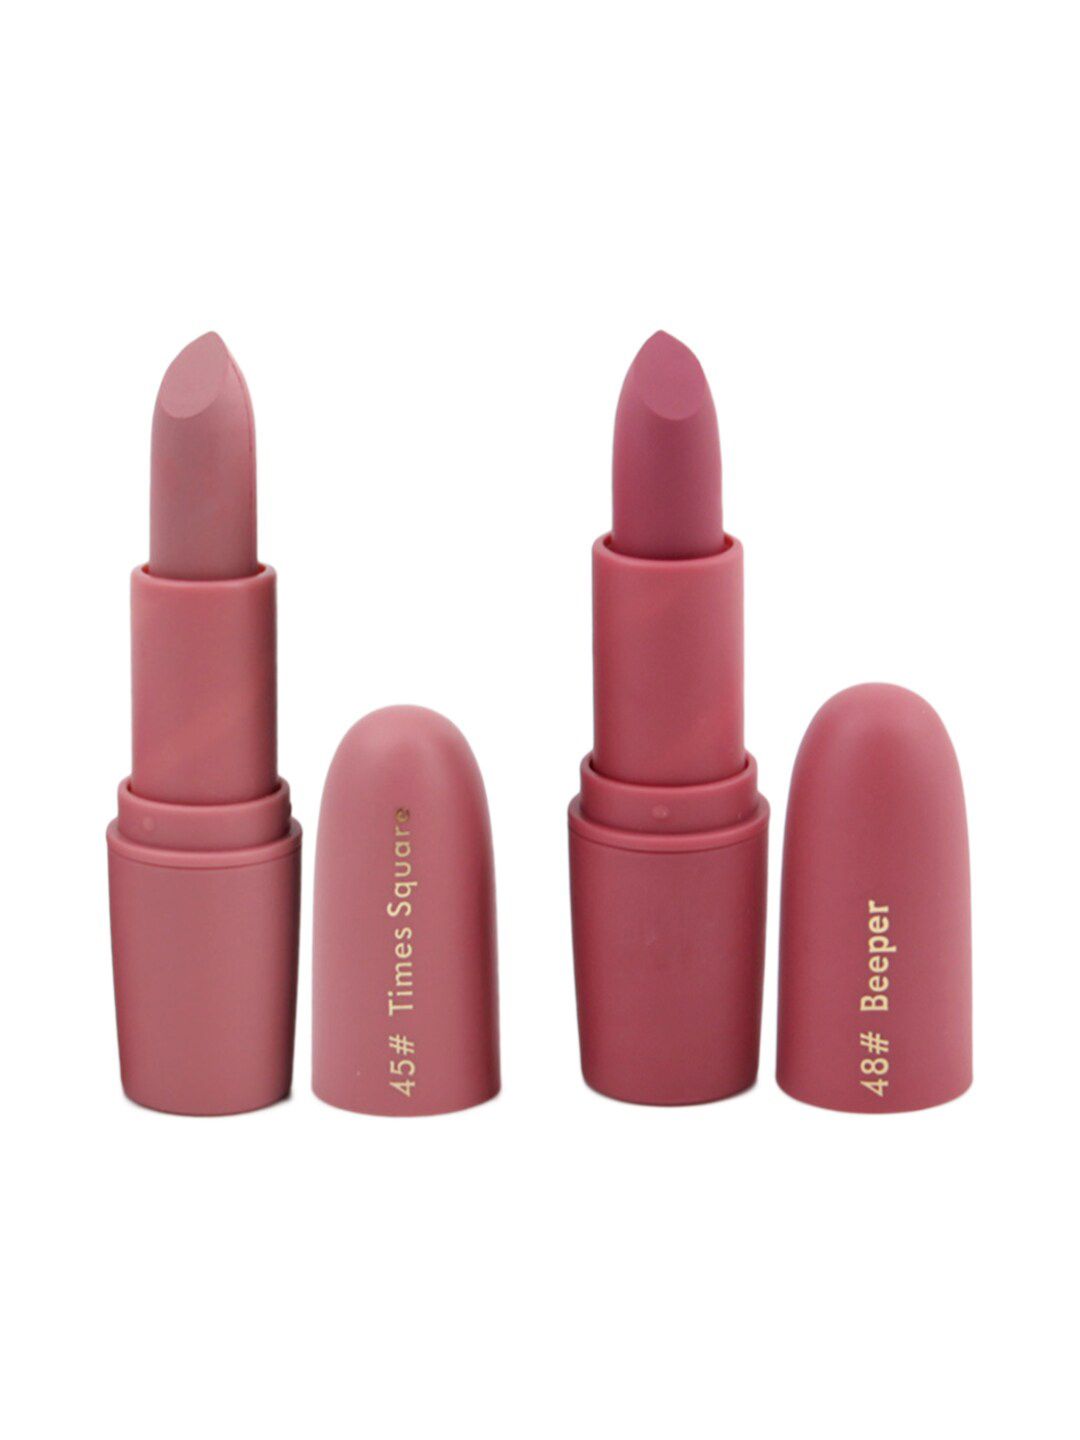 MISS ROSE Professional Make-Up Set of 2 Matte Lipsticks - Times Square 45 & Beeper 48 Price in India